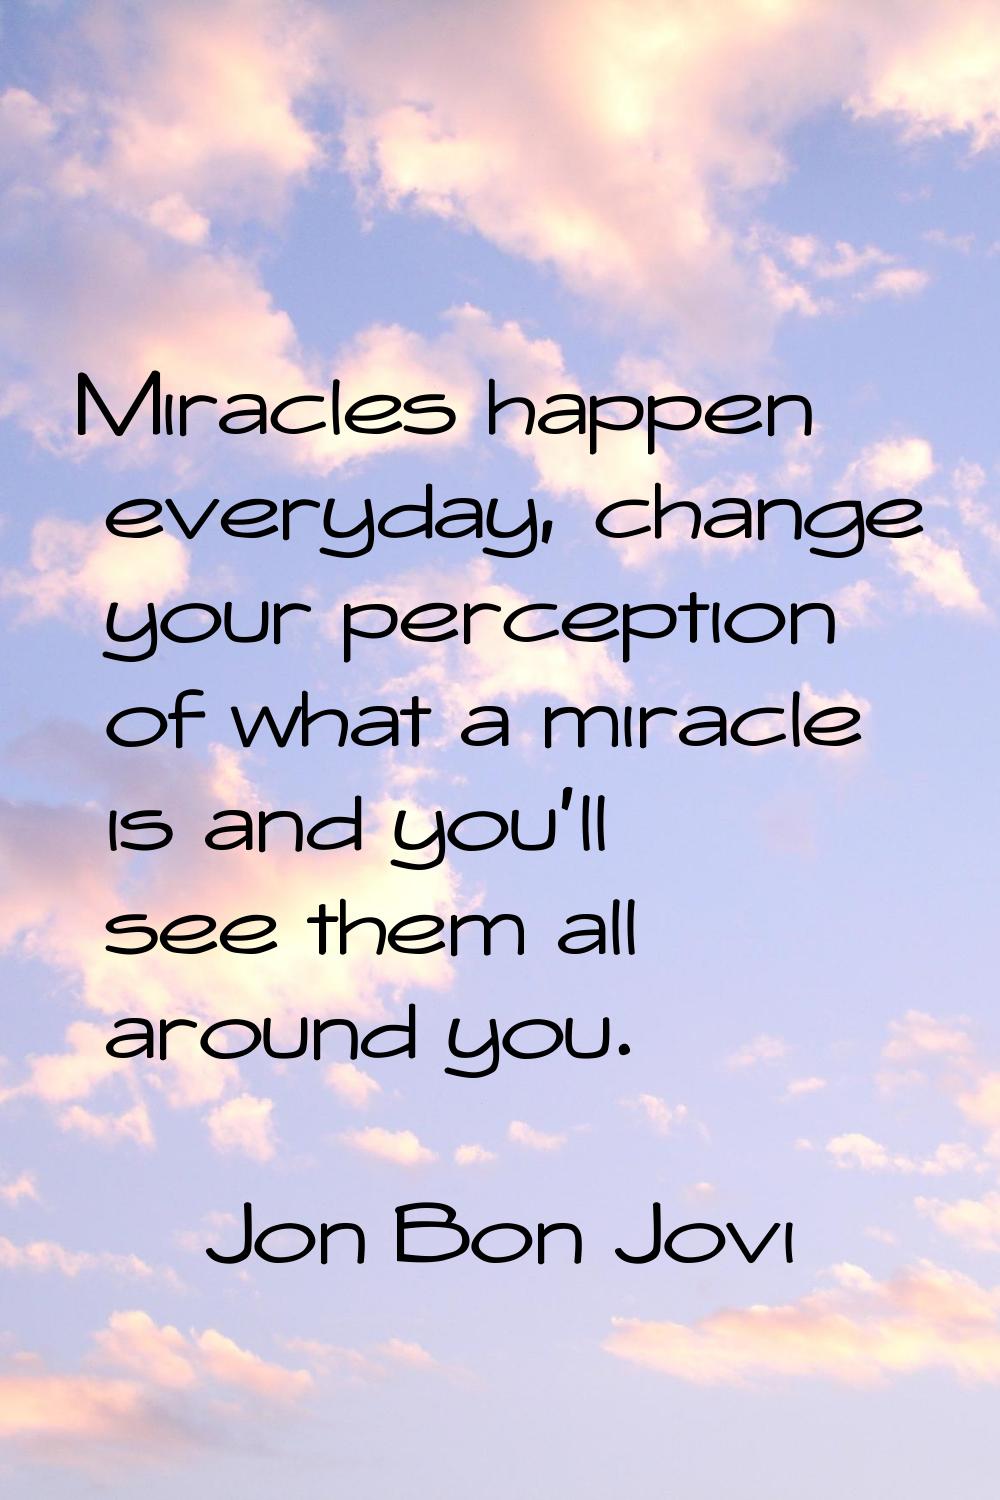 Miracles happen everyday, change your perception of what a miracle is and you'll see them all aroun